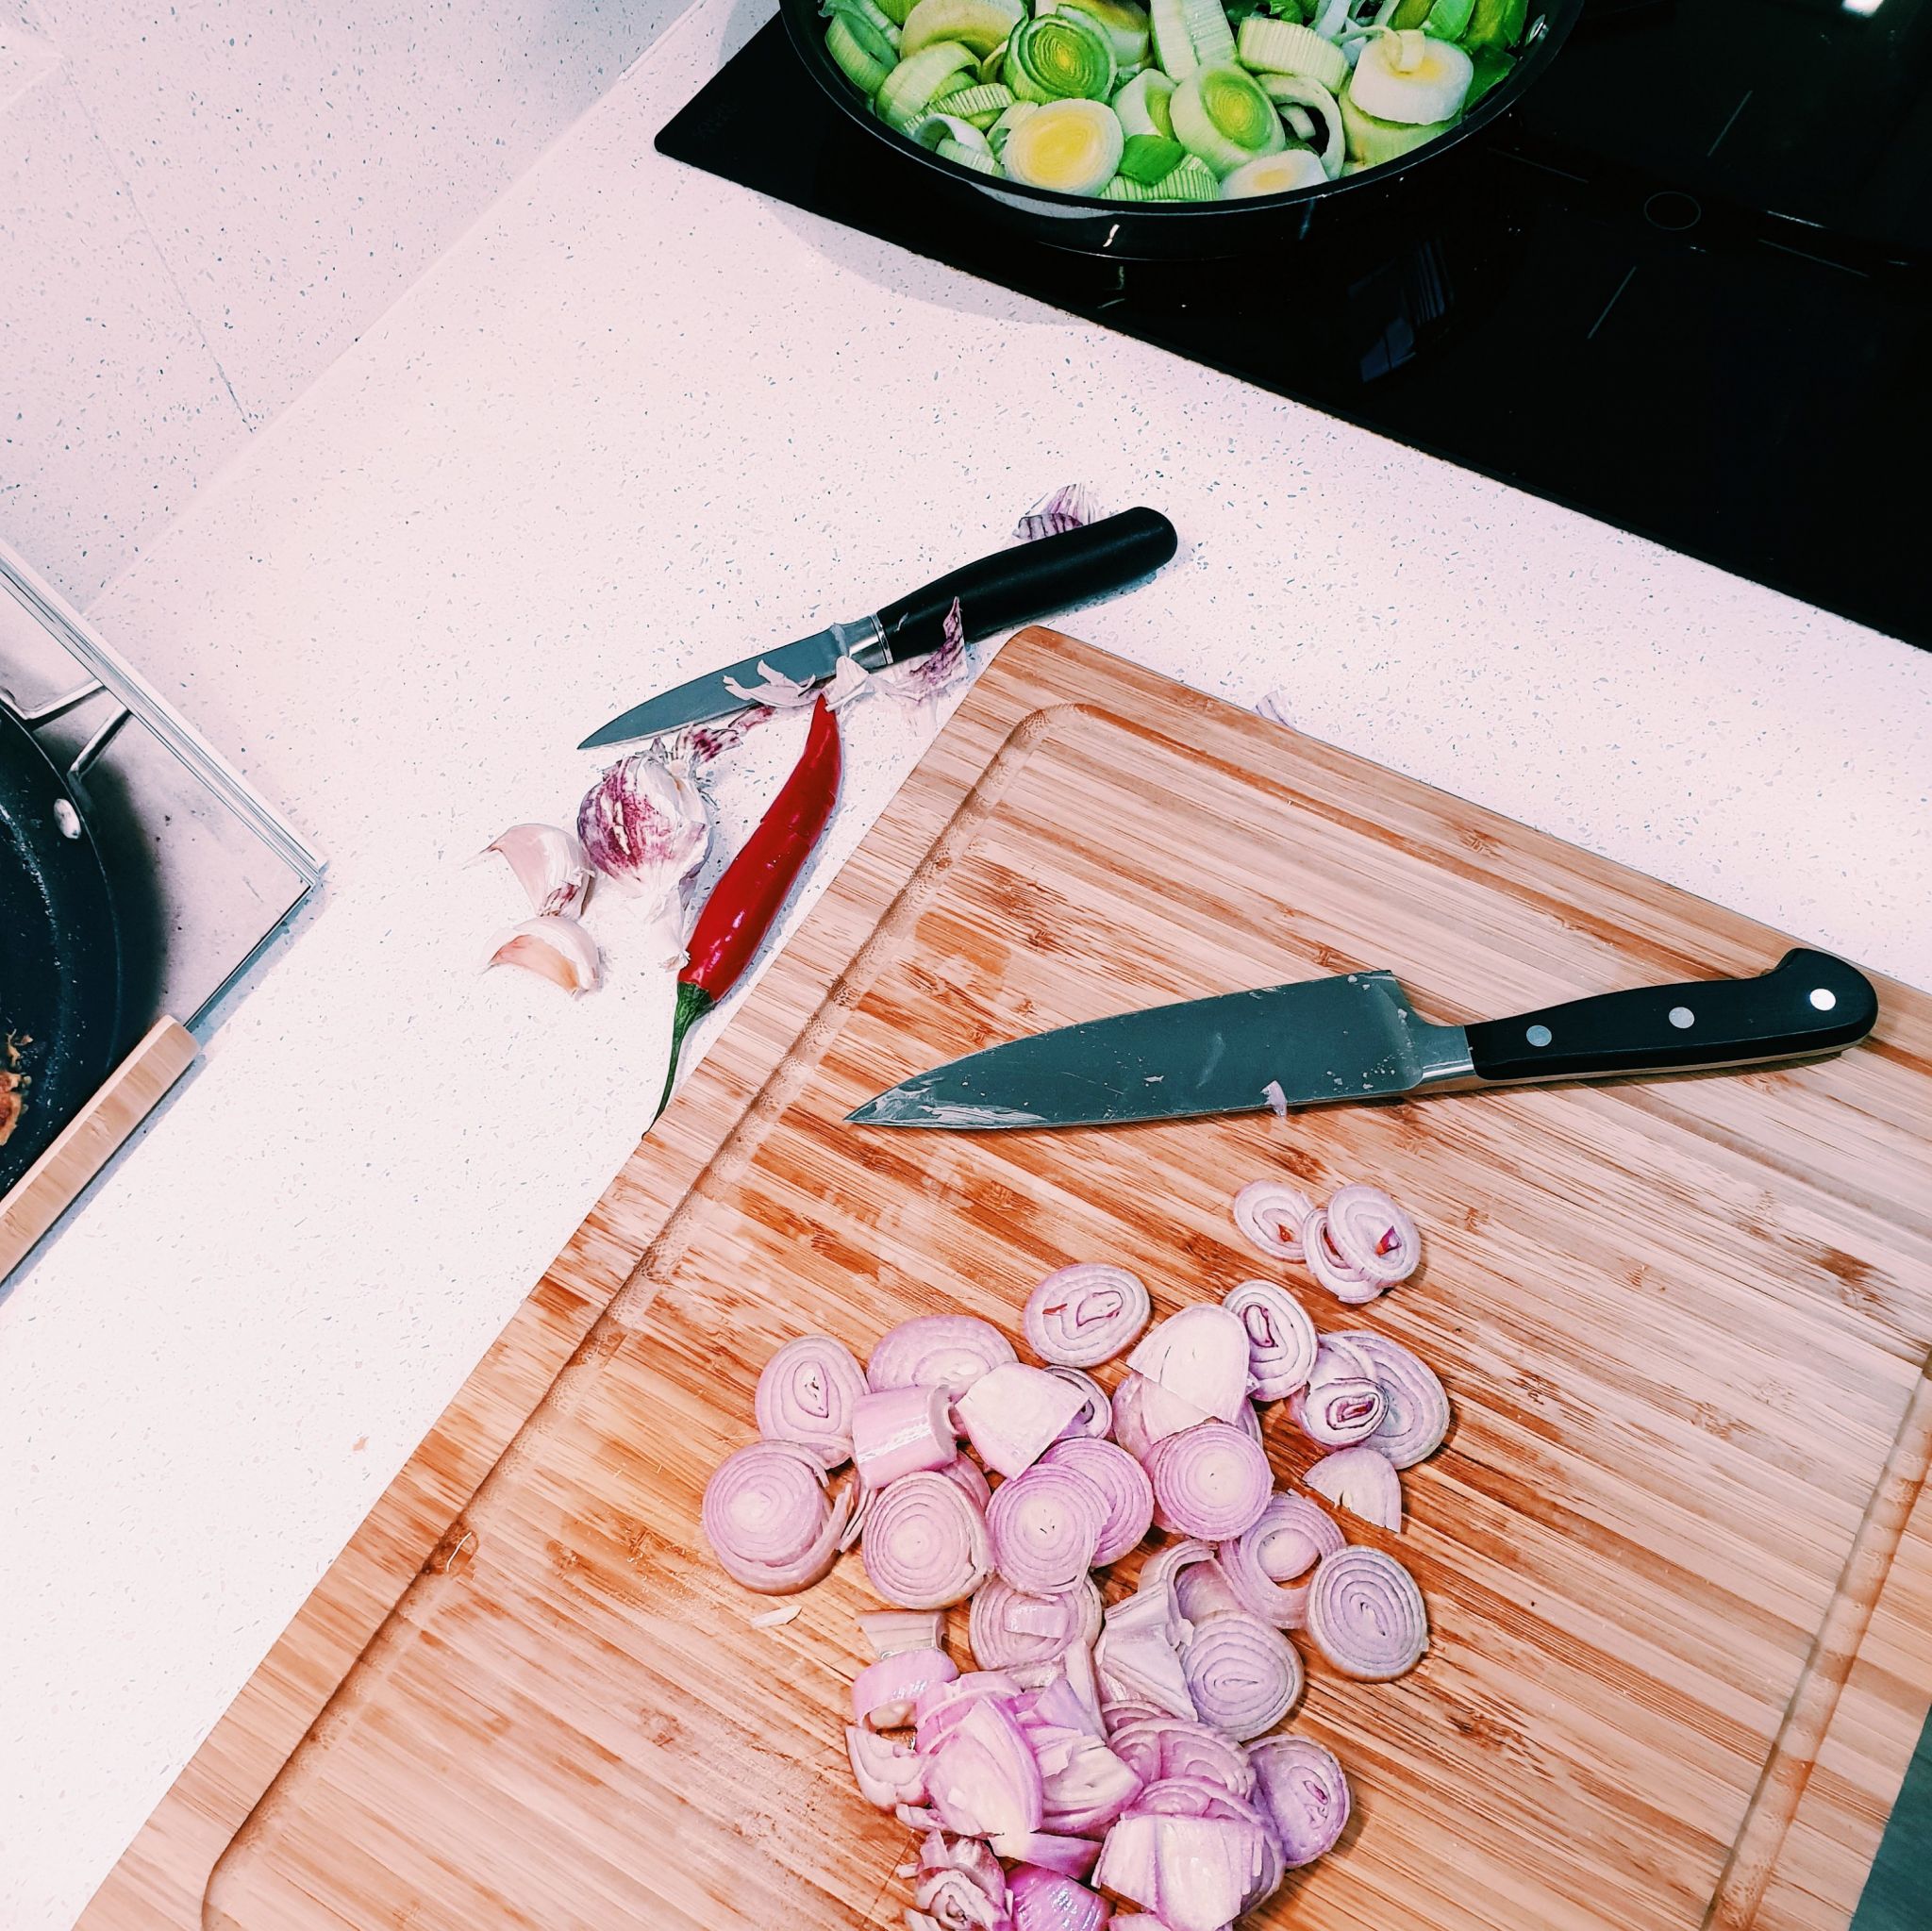 Finely chop the shallots 